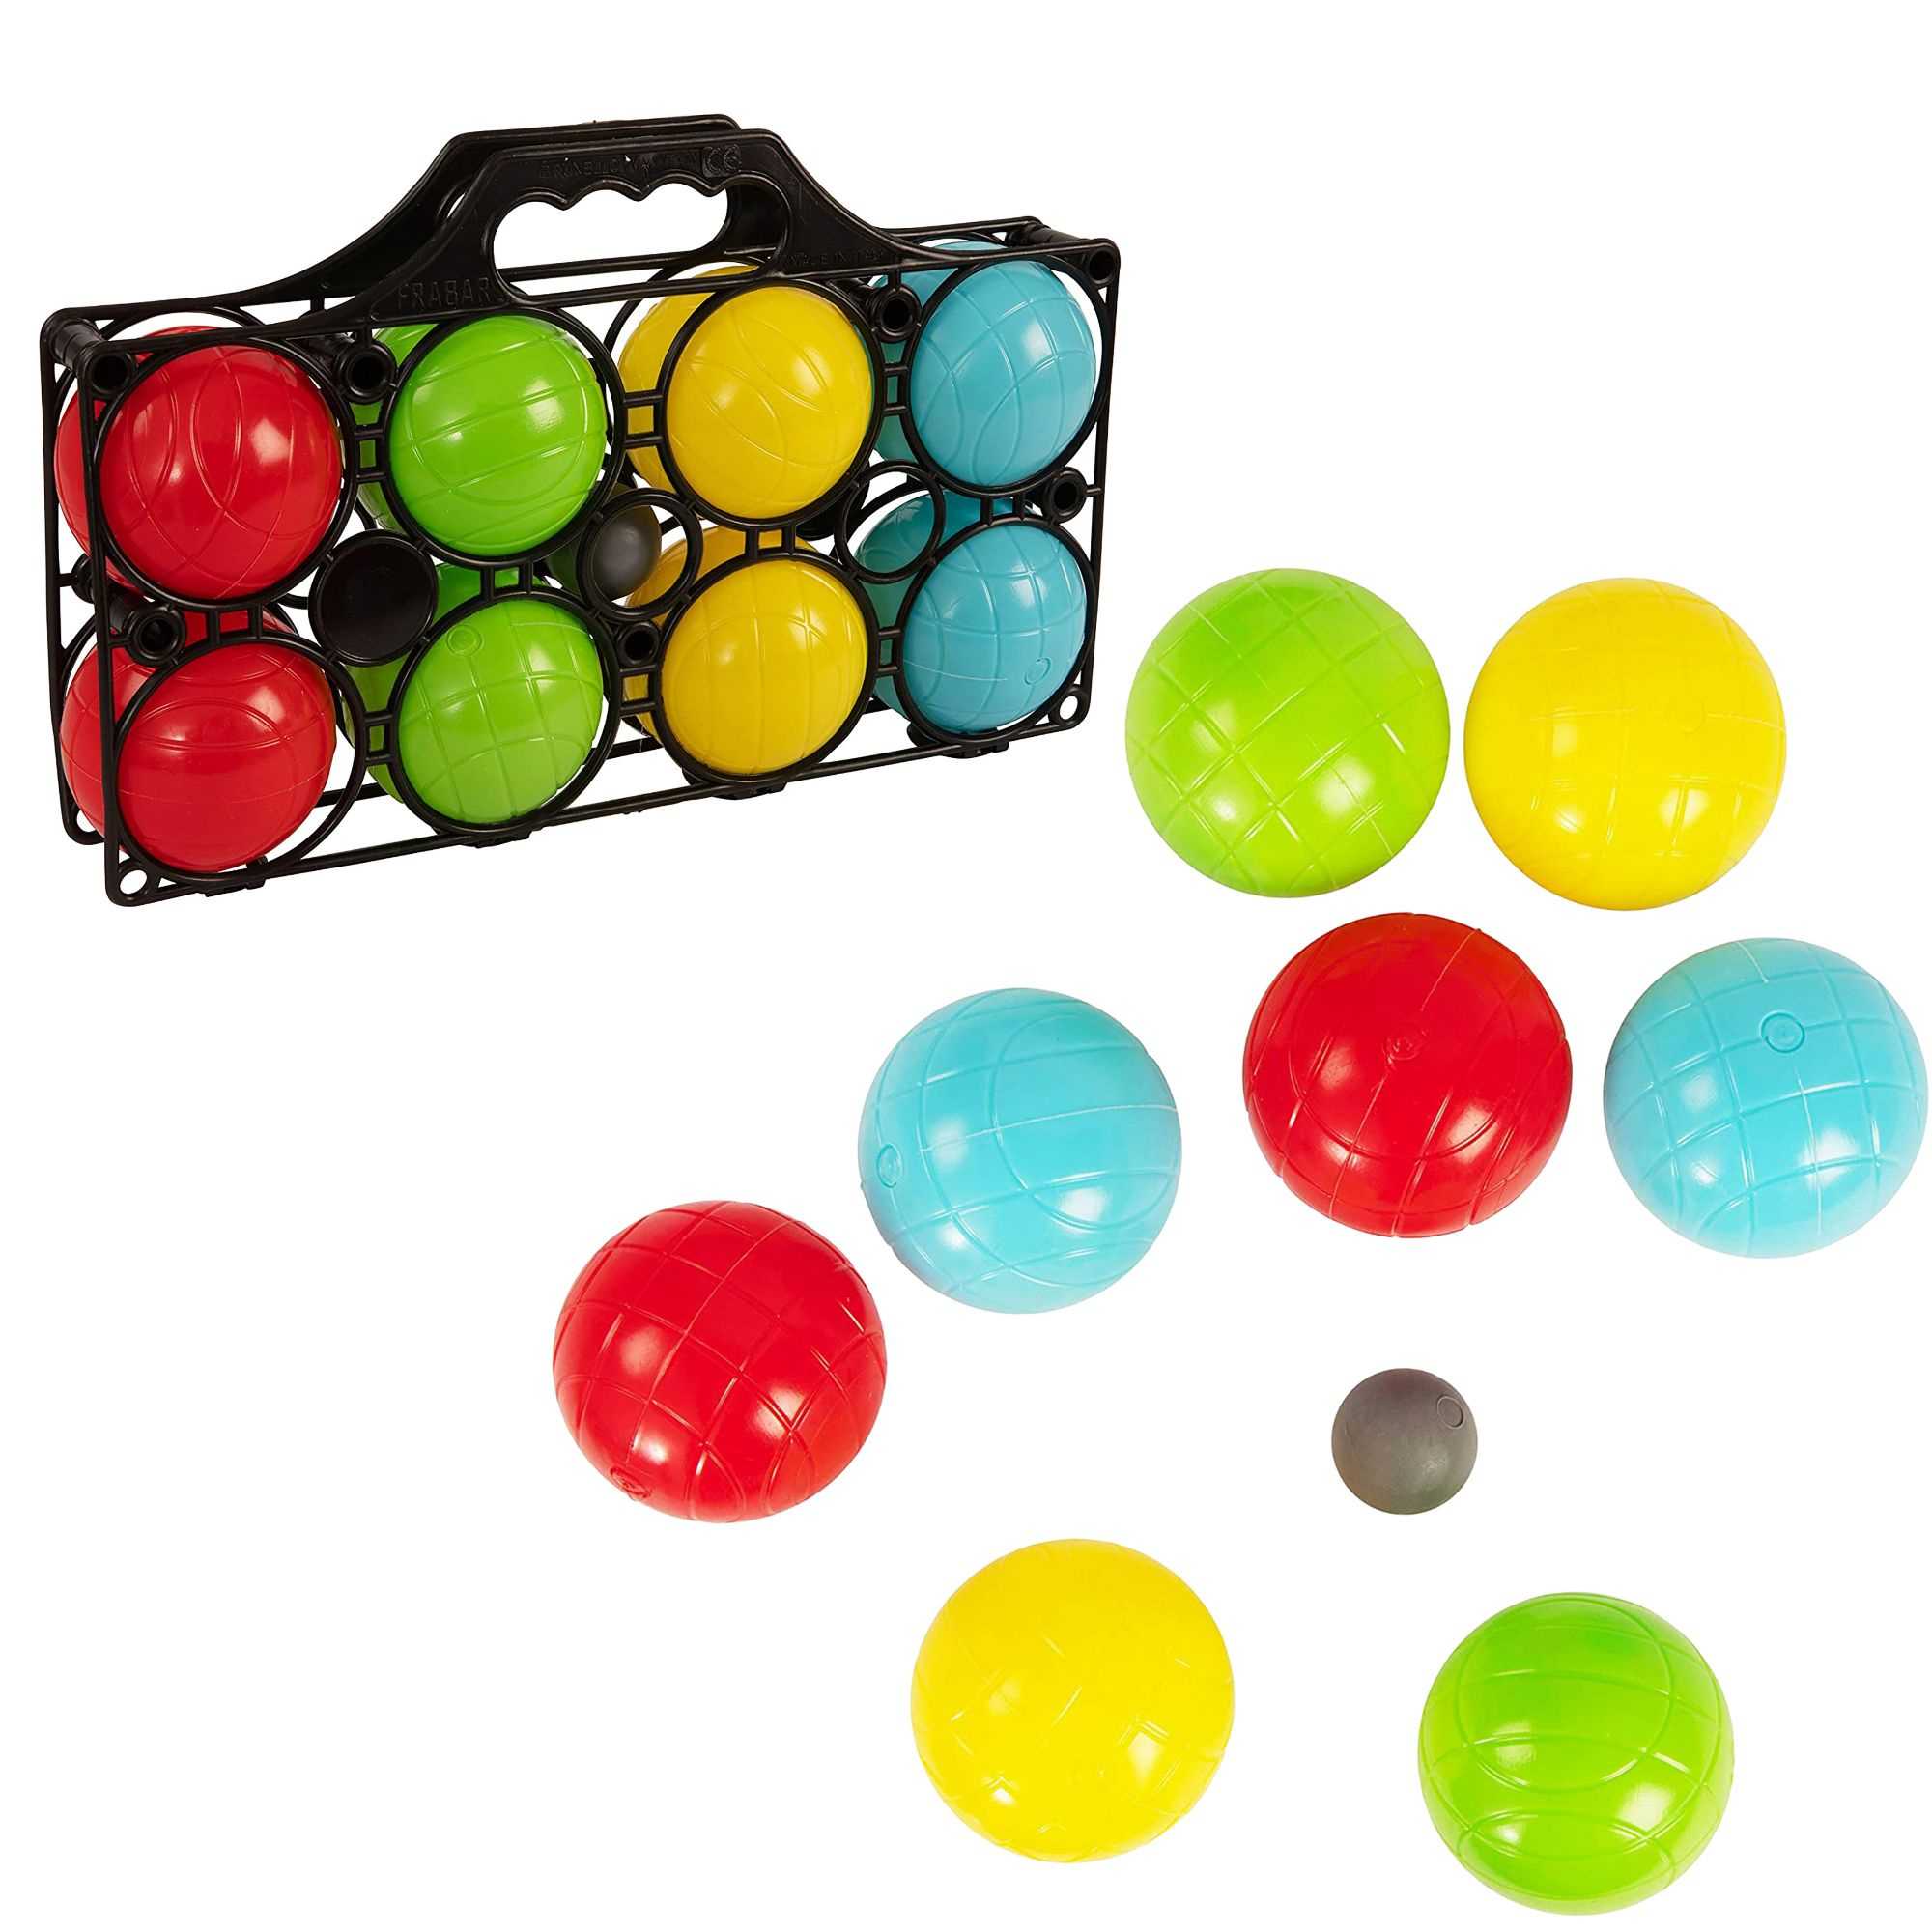 boules garden game, childrens boules game, holiday games, travel games, outdoor toys, backyard games set, traditional garden game, caravanning accessories, camping games